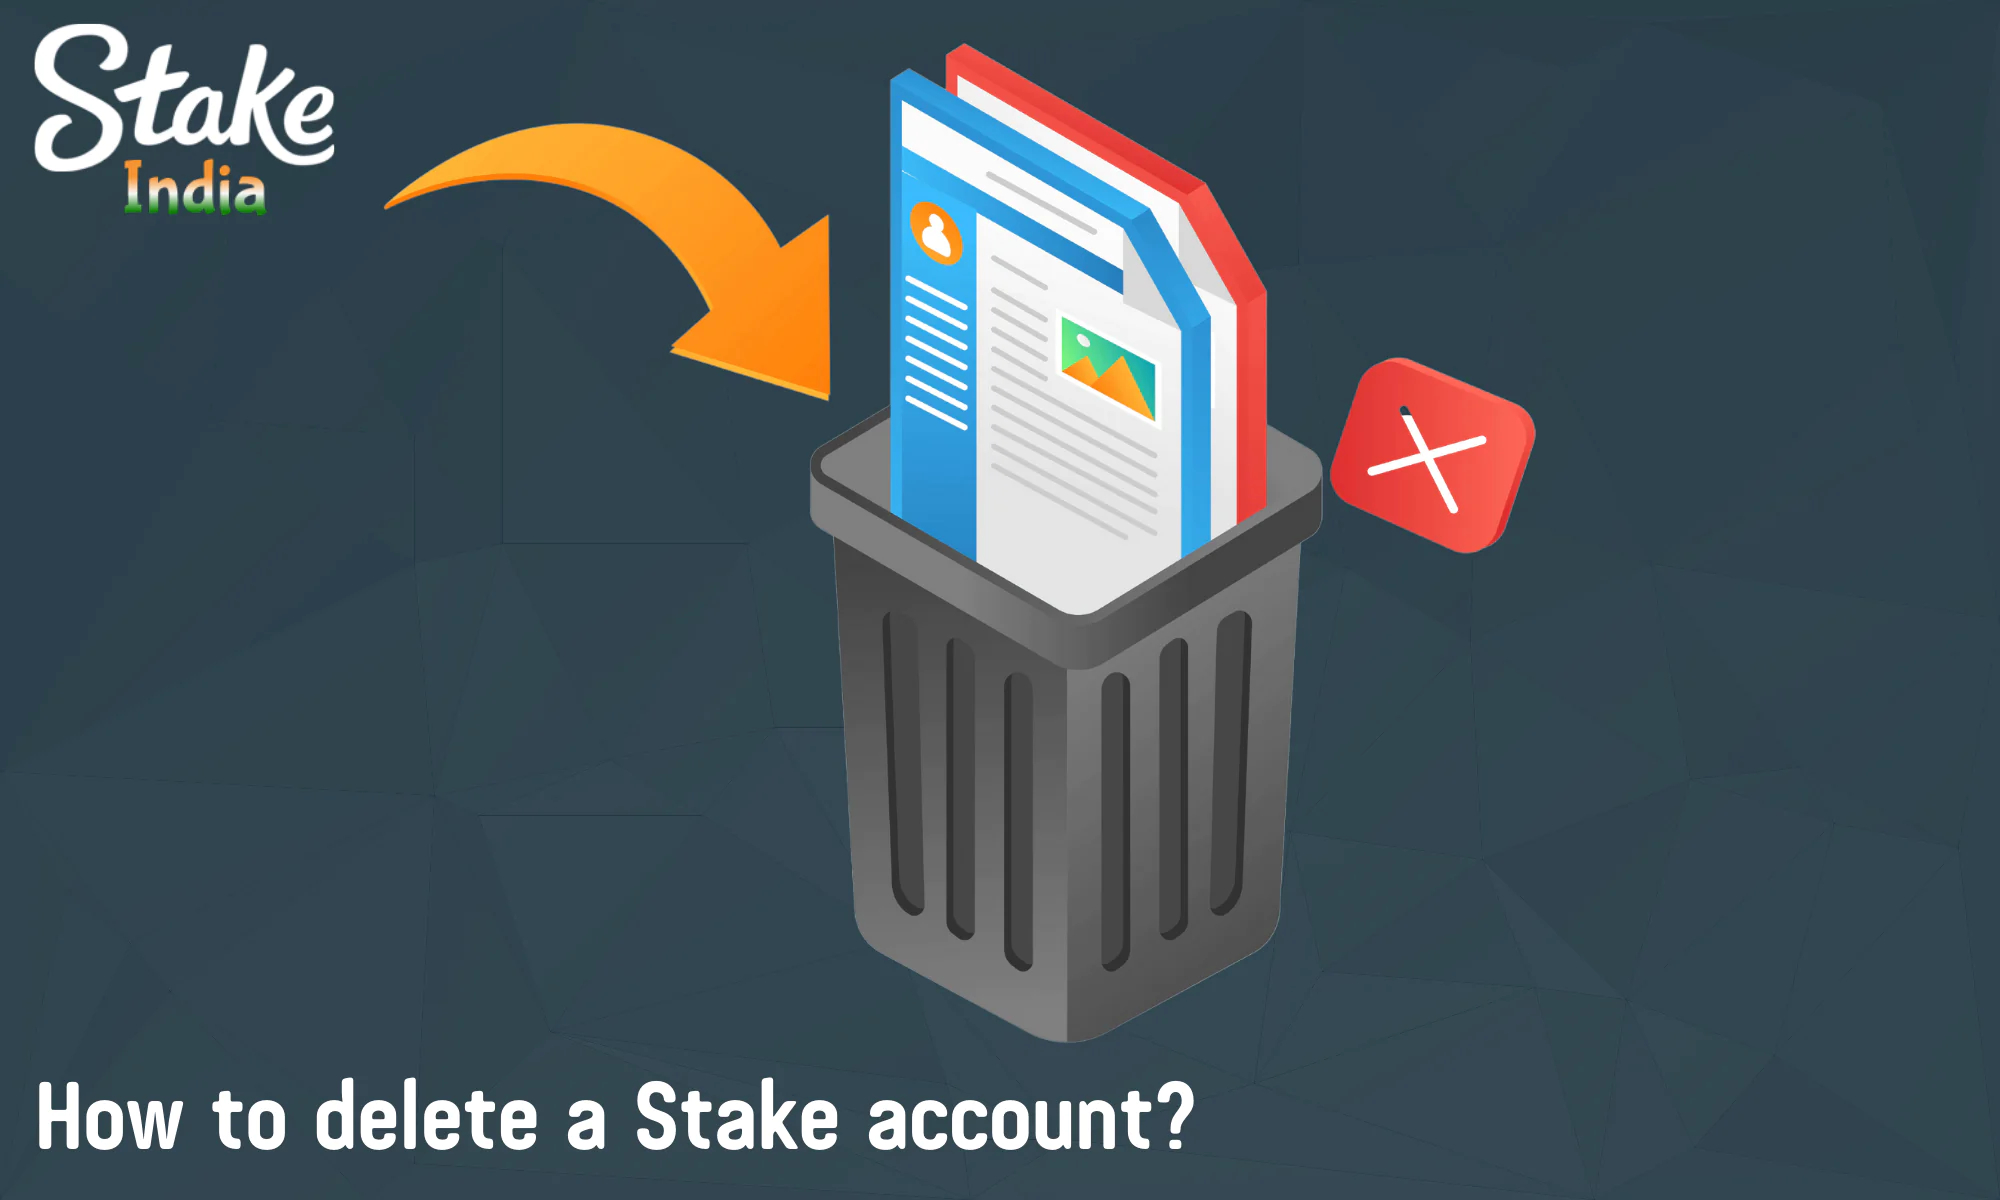 Stake has a special account deletion procedure